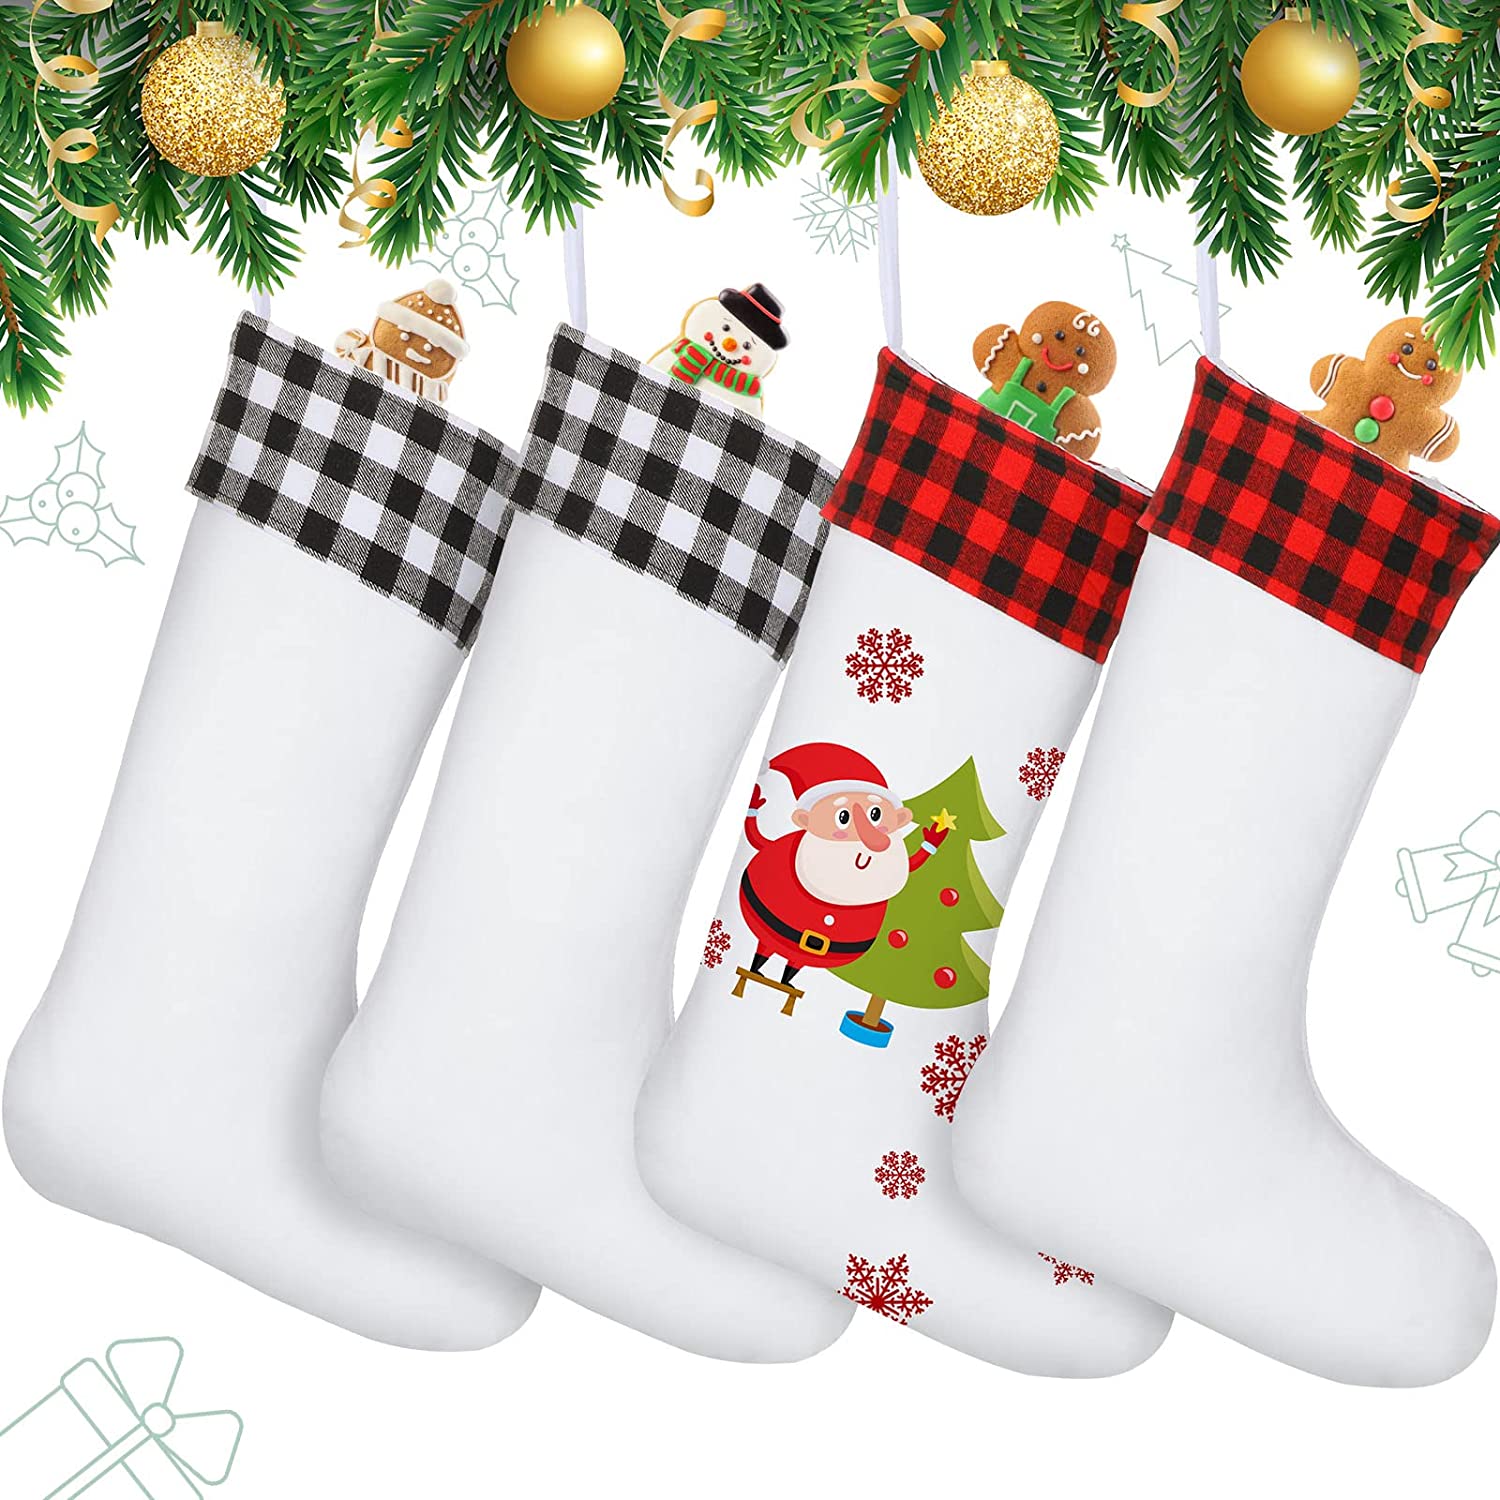 Sublimation Christmas Fireplace Hanging Stockings for Decoration Featured Image